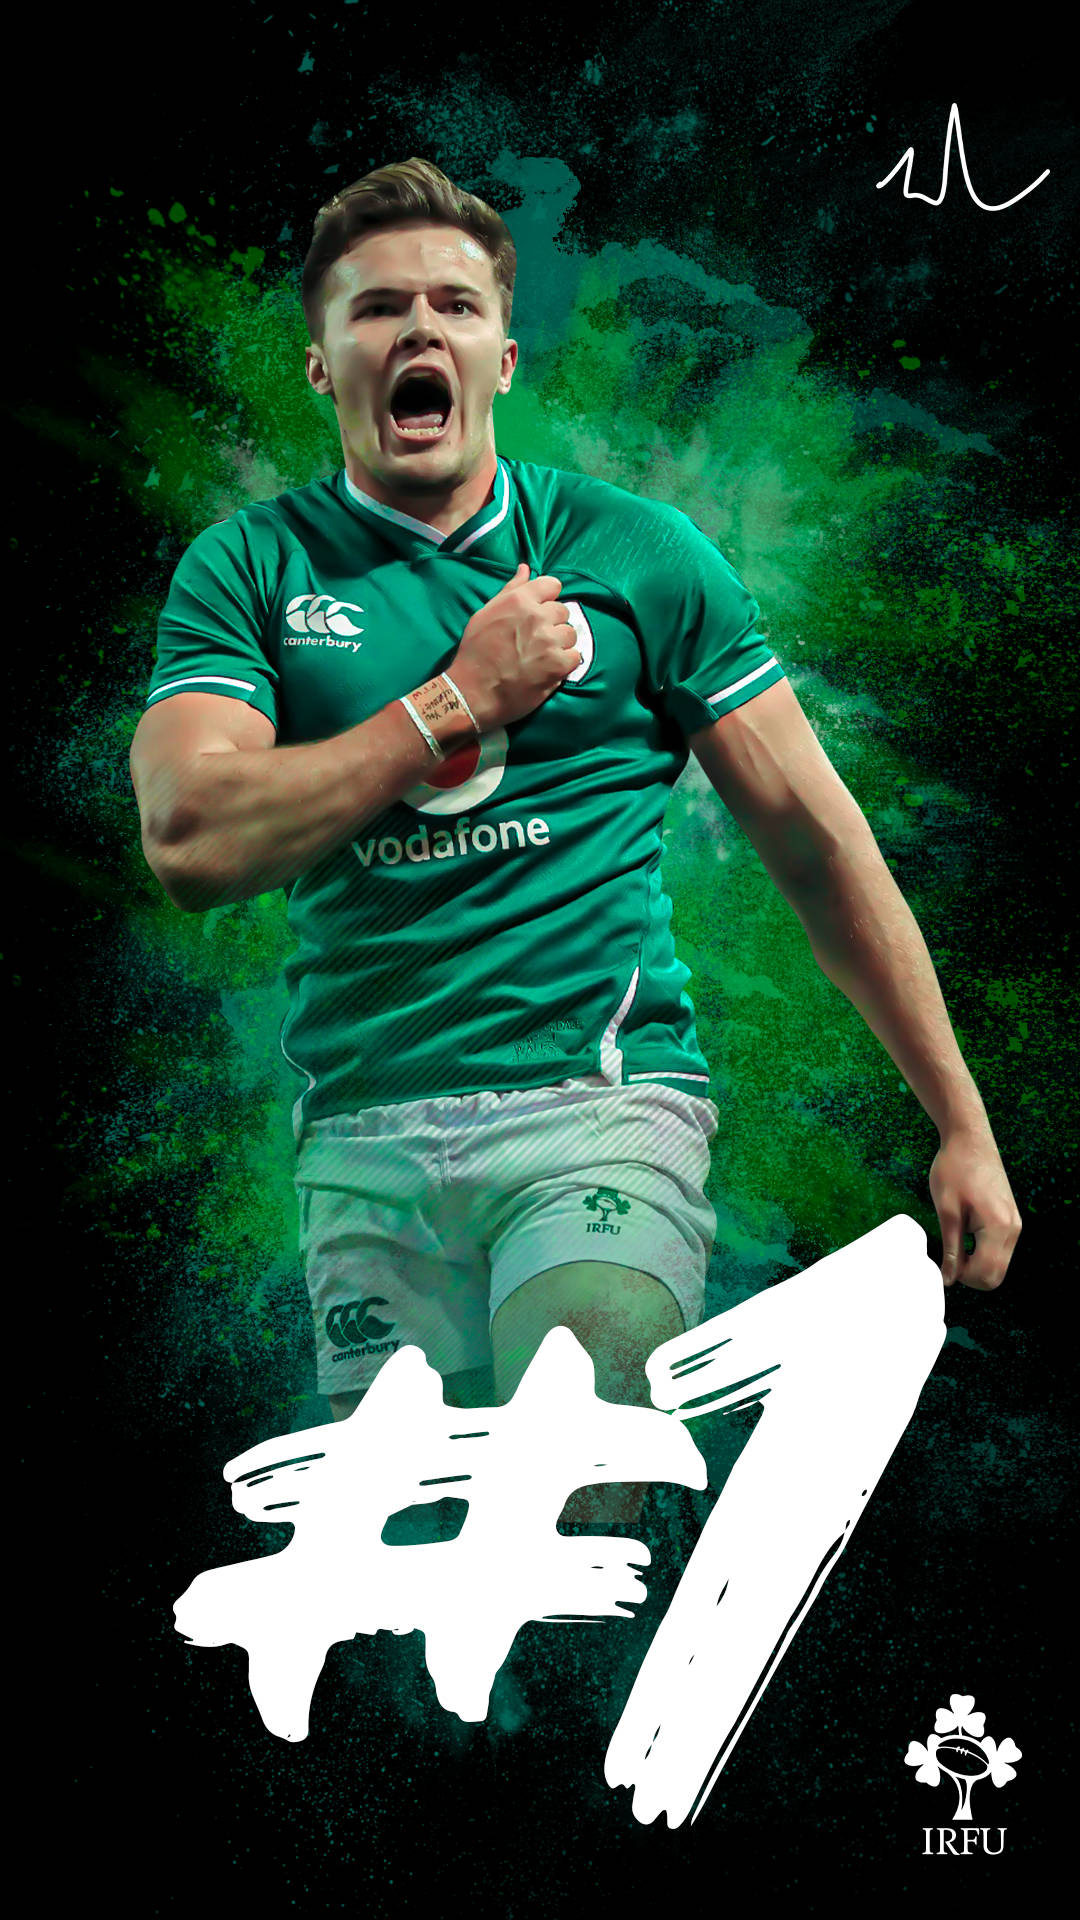 Jacob Stockdale - The Brightest Star Of Irish Rugby